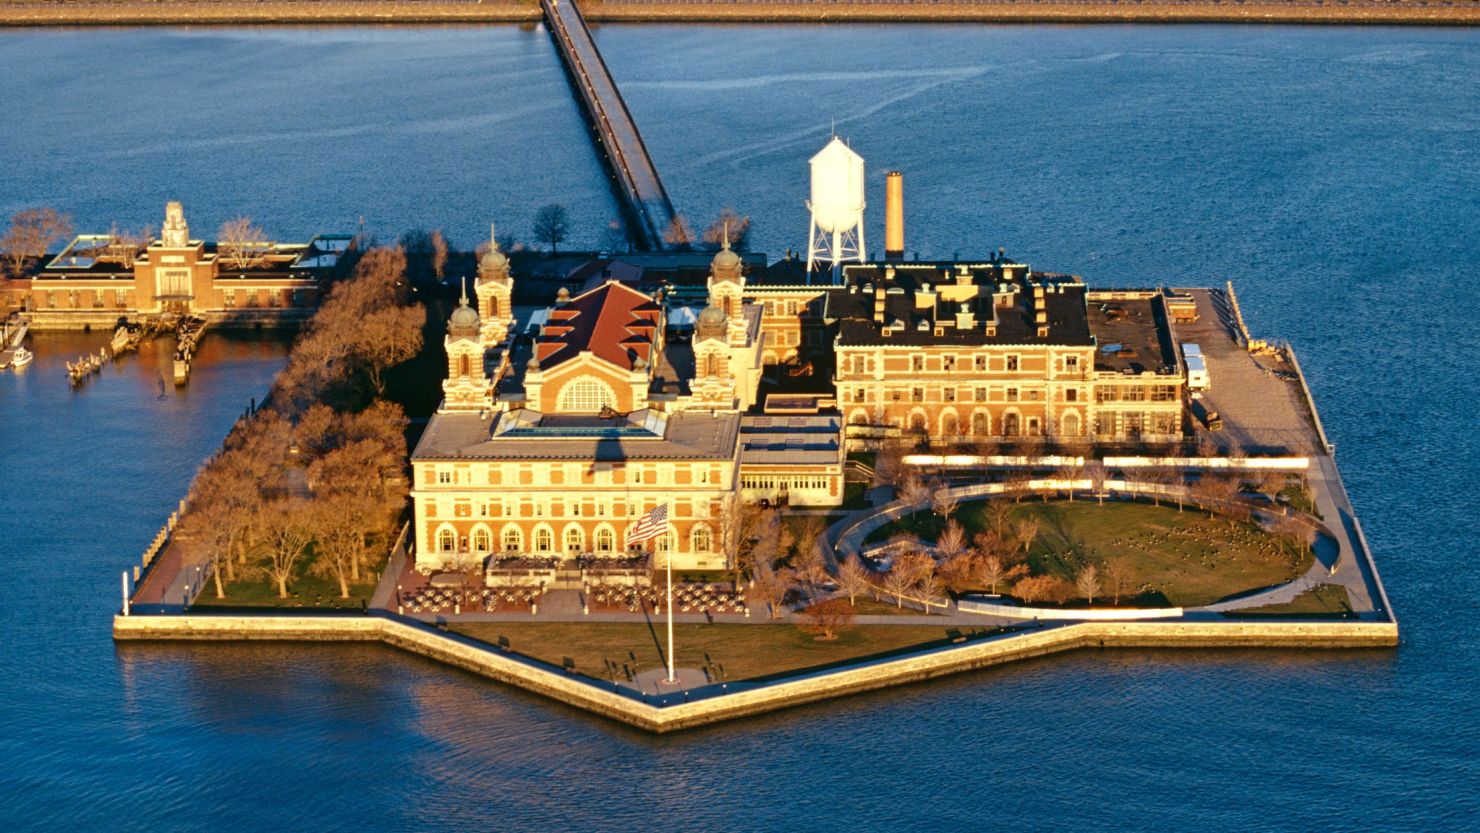 There is no projected reopening date for New York's iconic Ellis Island, the National Park Service announced.